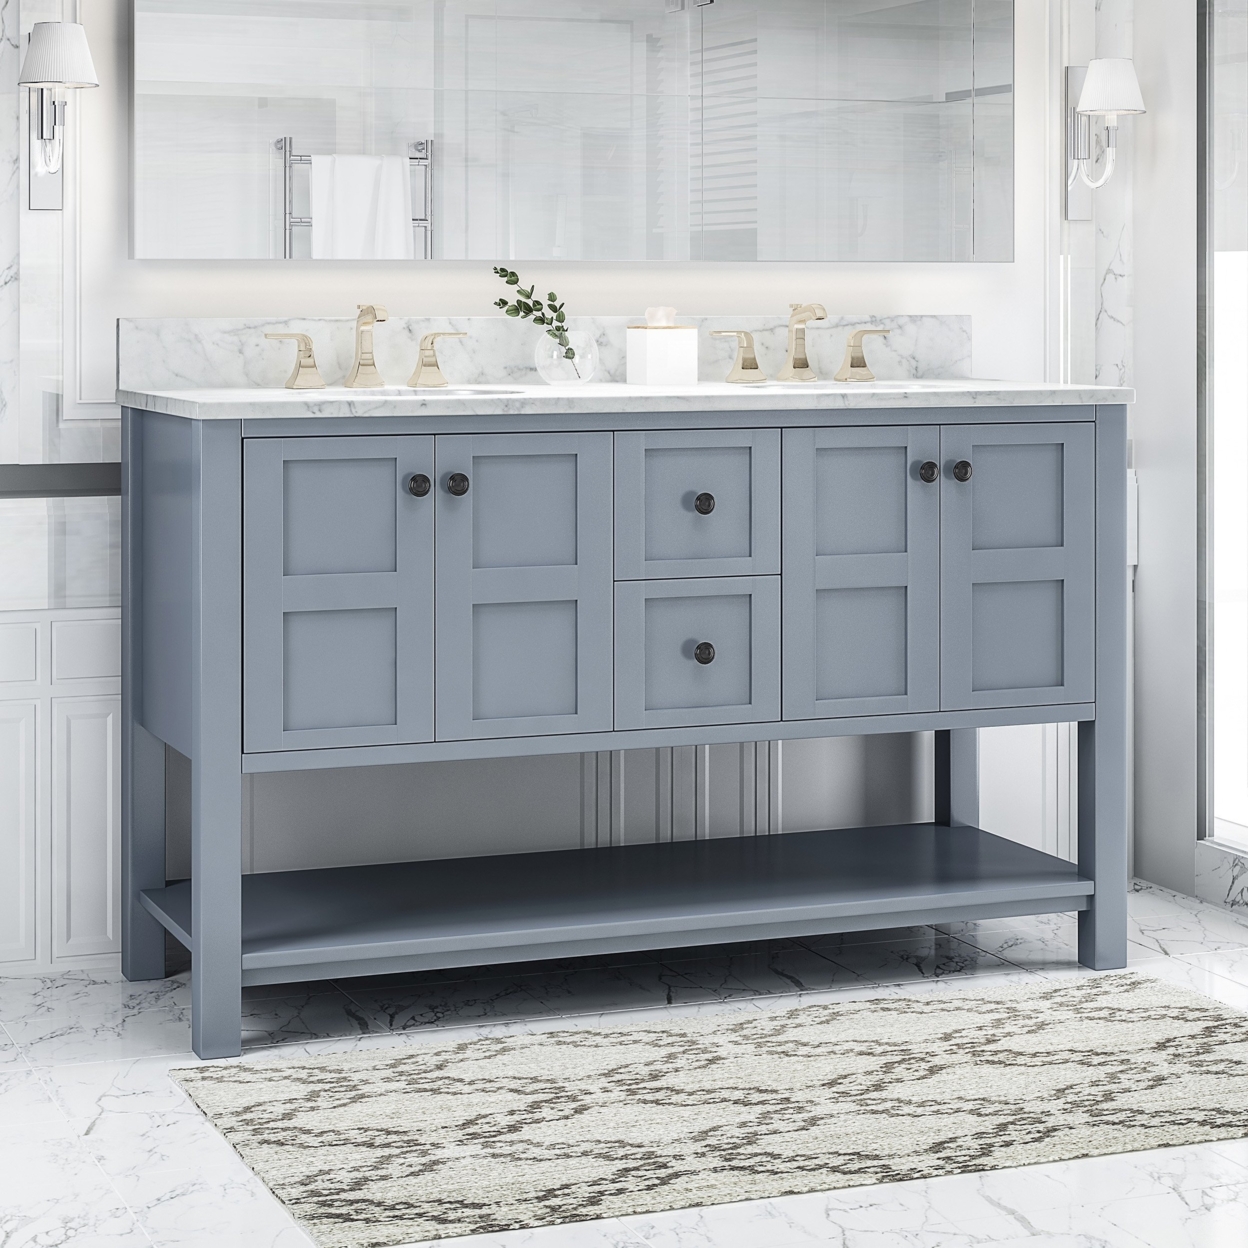 Jamison Contemporary 60 Wood Bathroom Vanity (Counter Top Not Included) - White